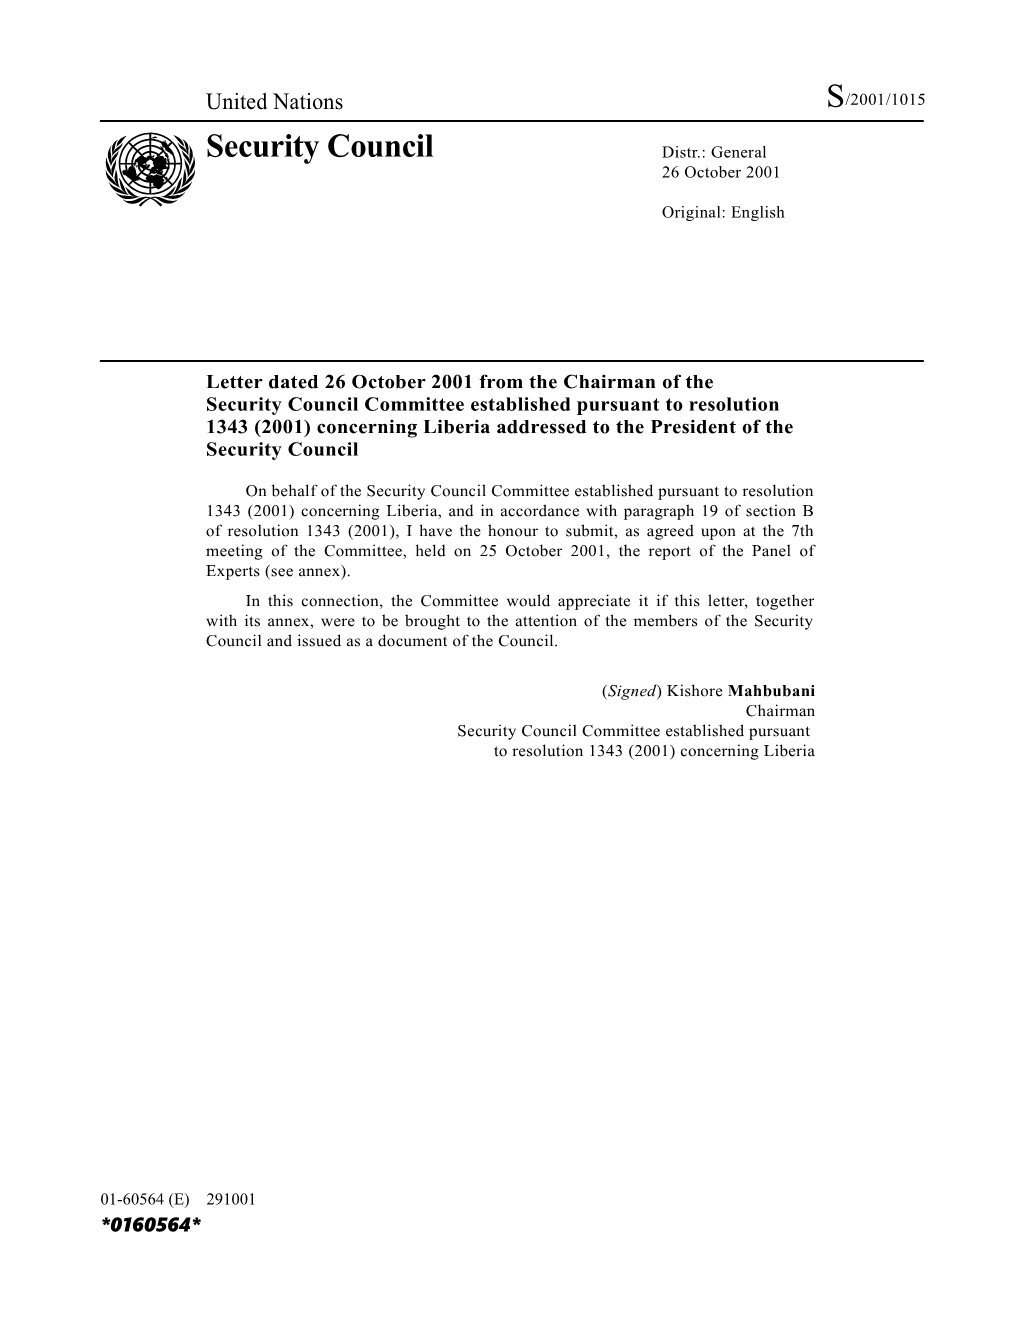 Letter Dated 26 October 2001 from the Chairman of the Security Council Committee Established